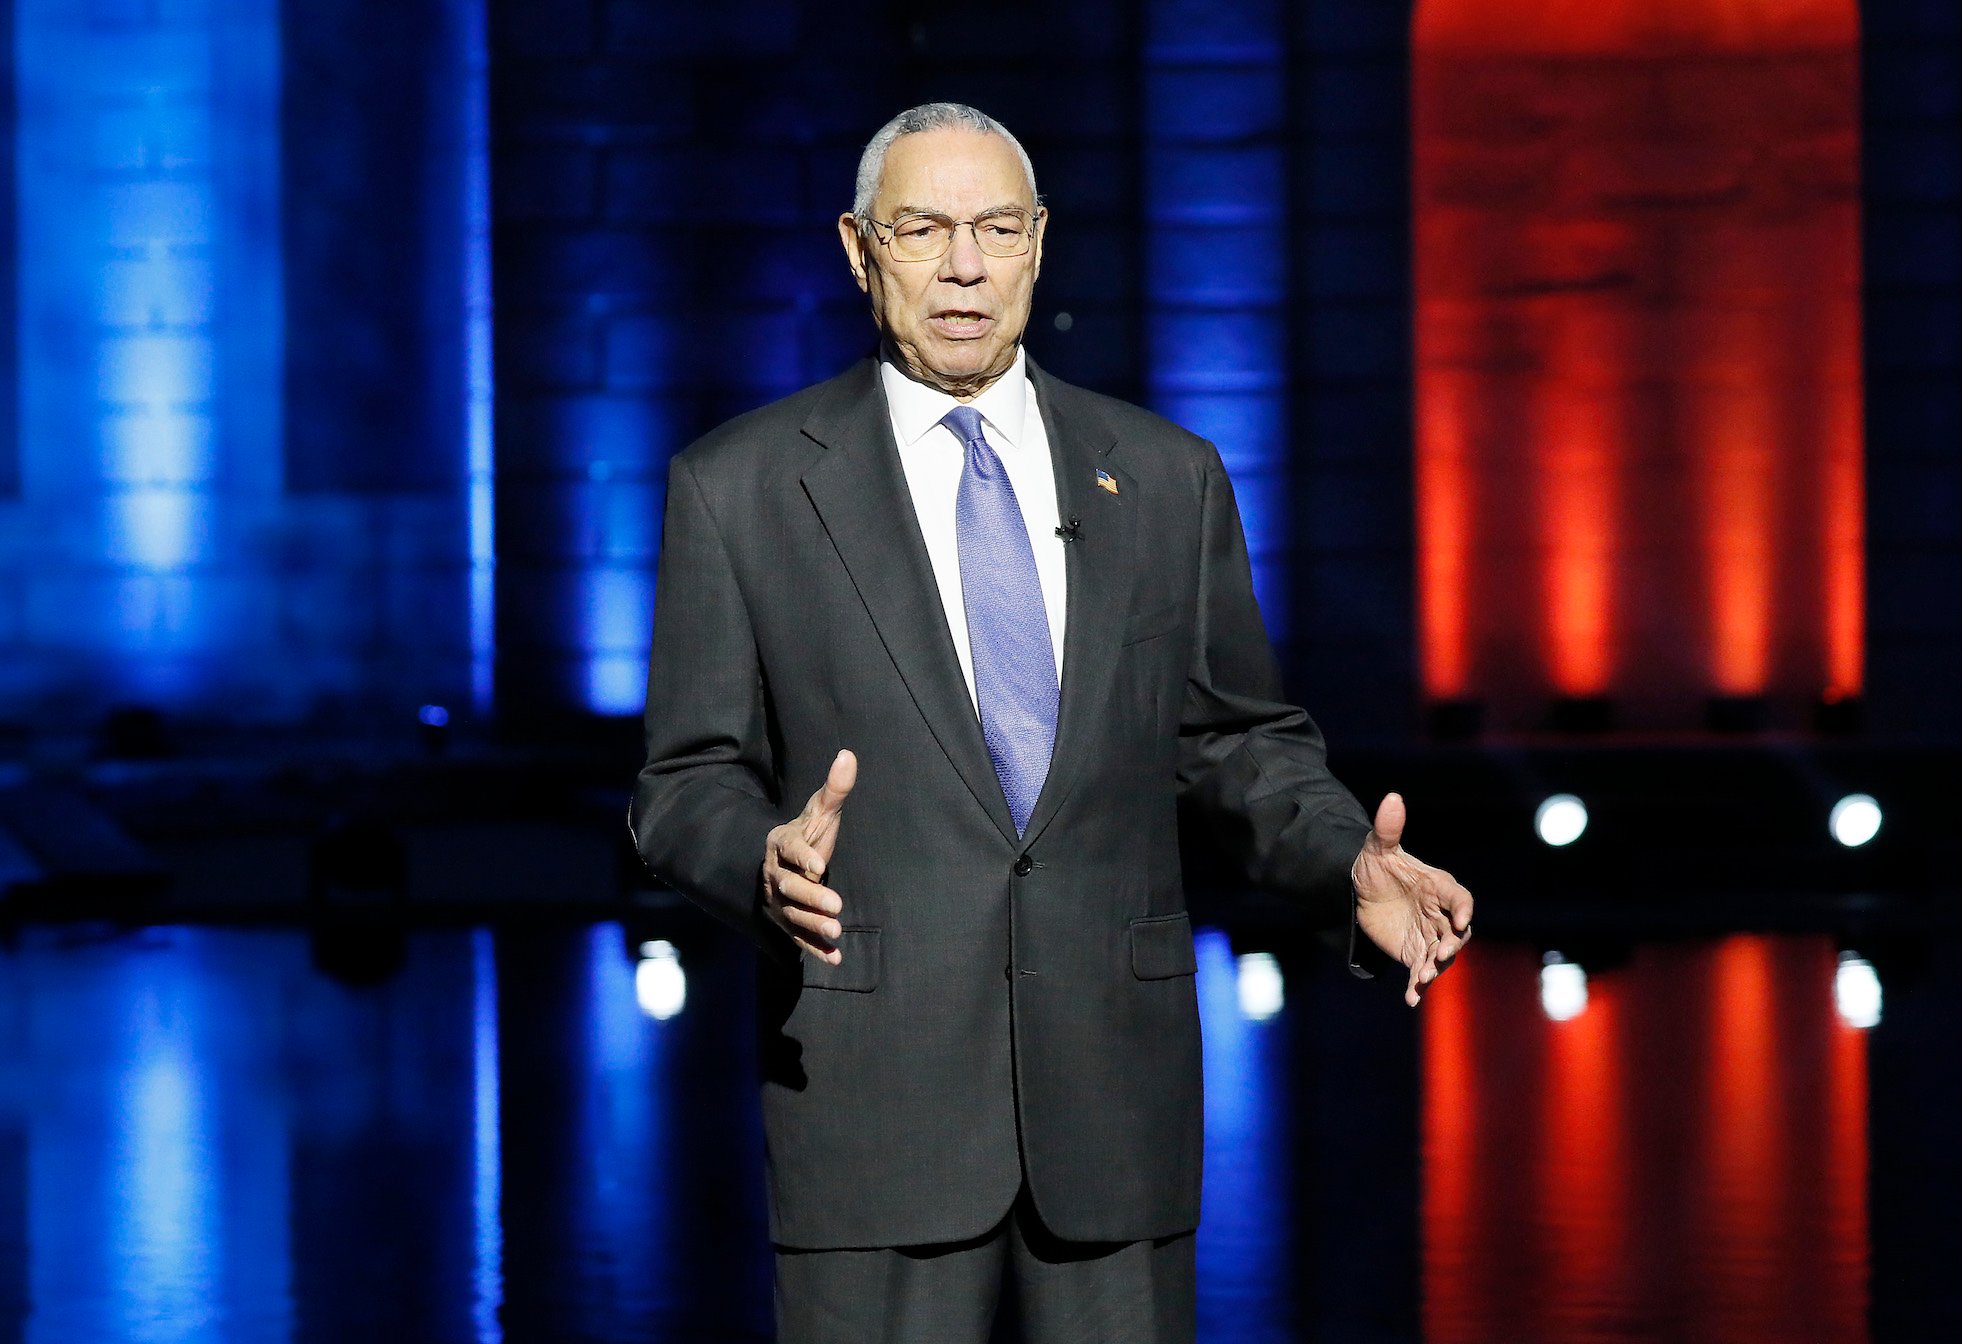 Colin Powell on stage during the Capital Concerts' 'National Memorial Day Concert'. Colin Powell's net worth grew well into the millions prior to his retirement